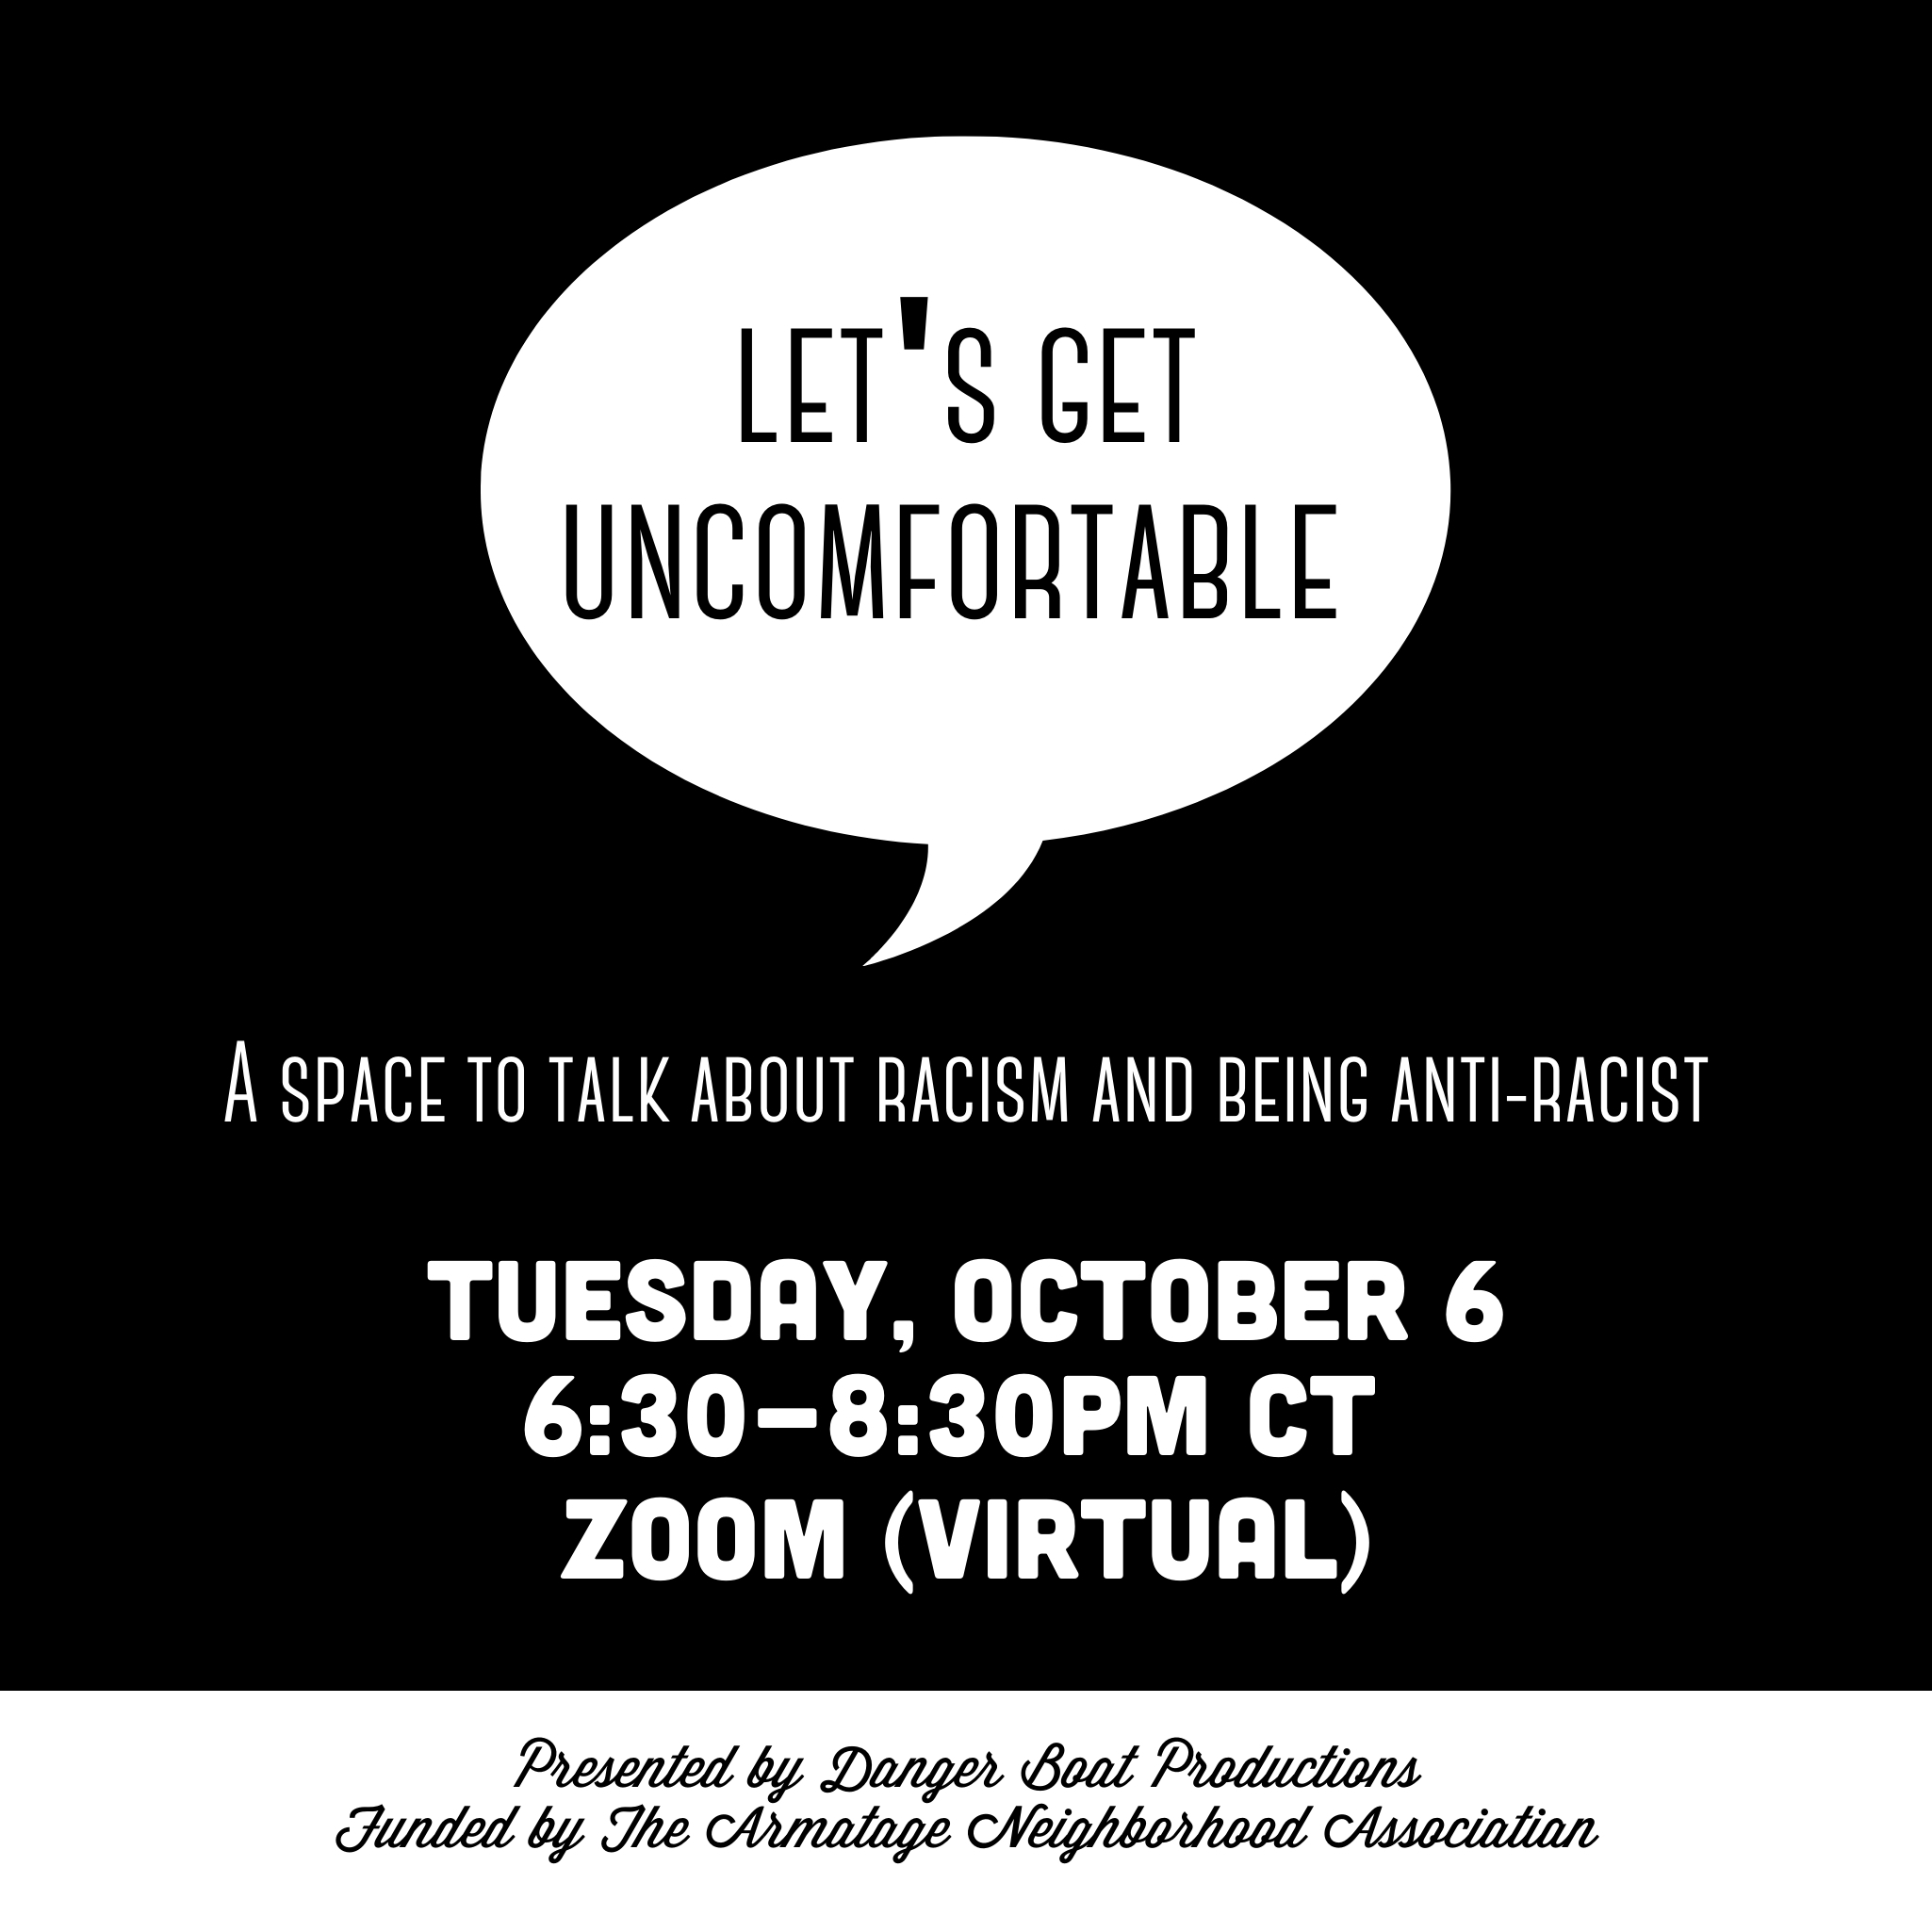 Let's Get Uncomfortable - A talk about racism and being anti-racist